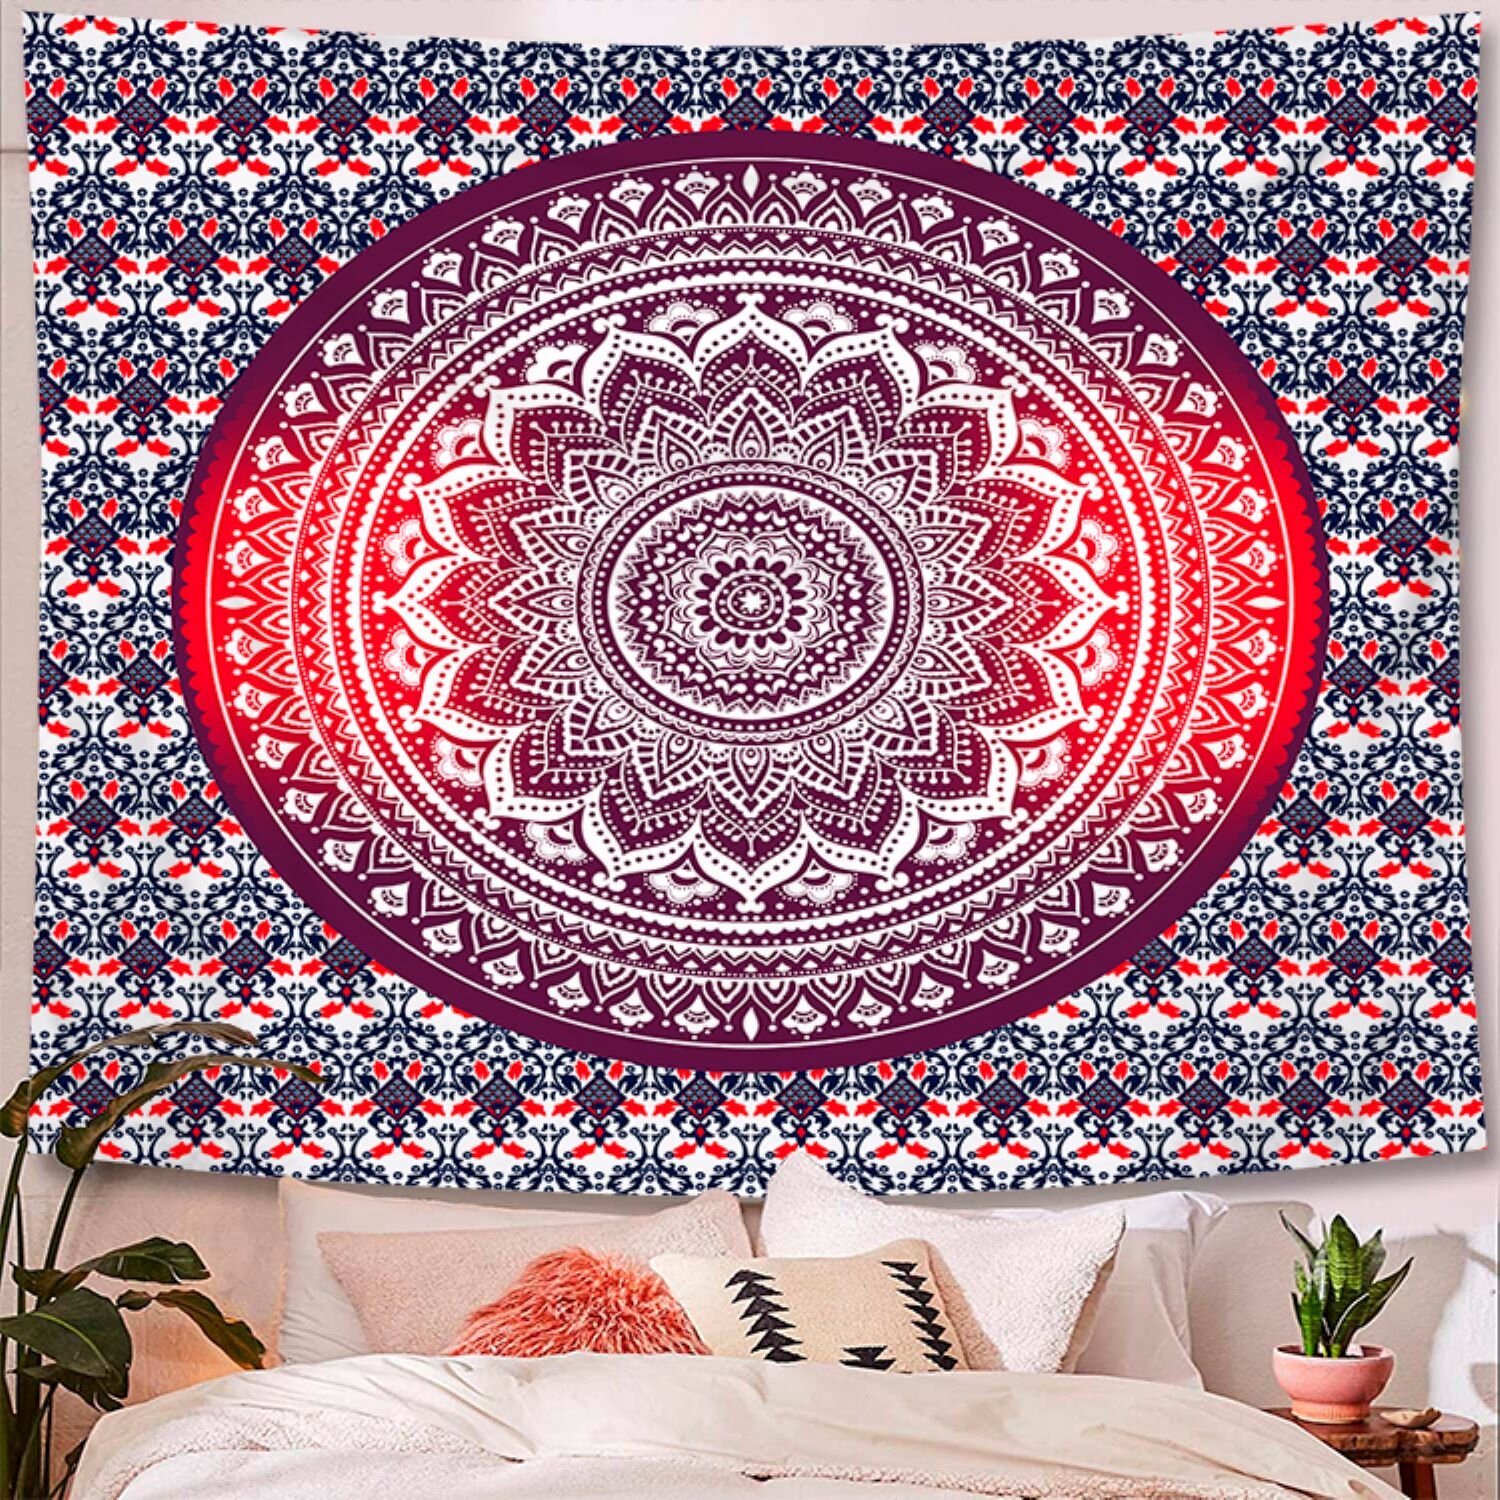 Flowers Rose Tapestry Wall Hanging Mandala Bedspread Indian Home Decor